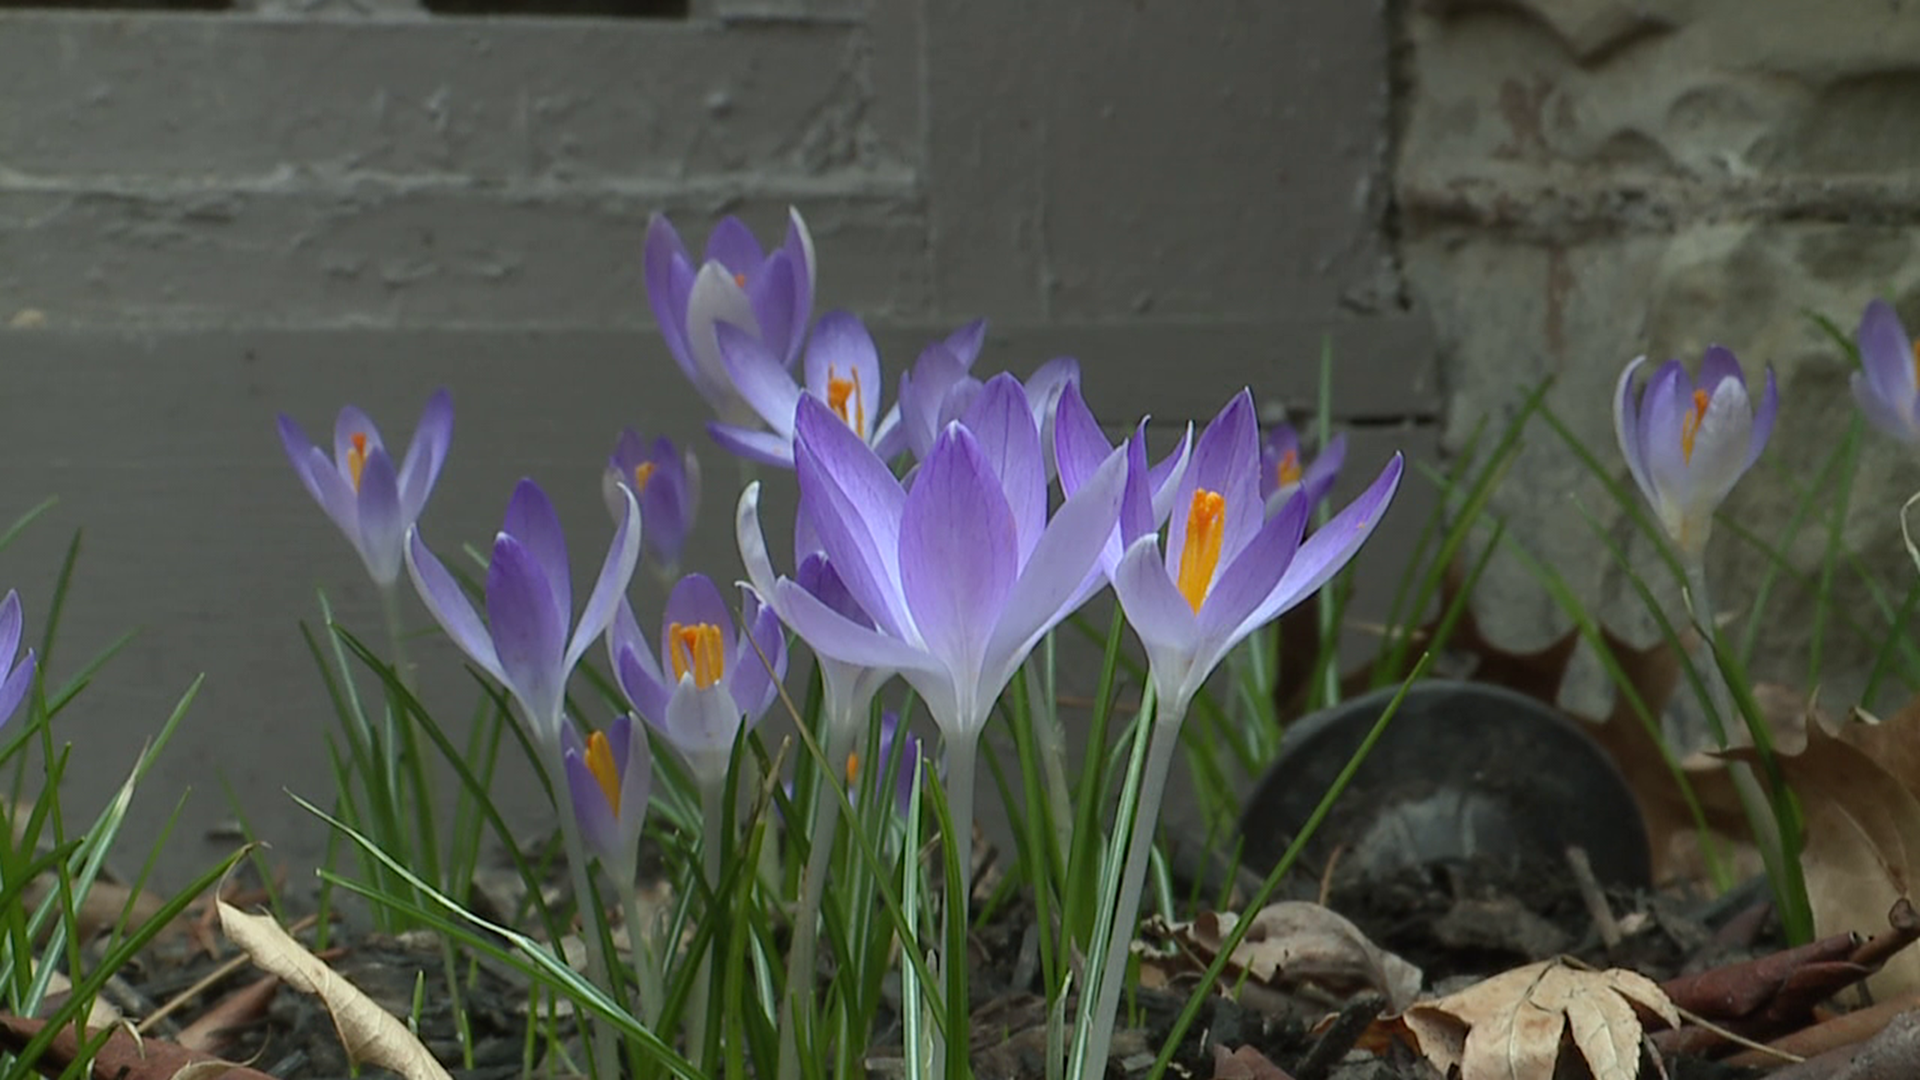 Splashes of color are popping up after a long, grey winter.